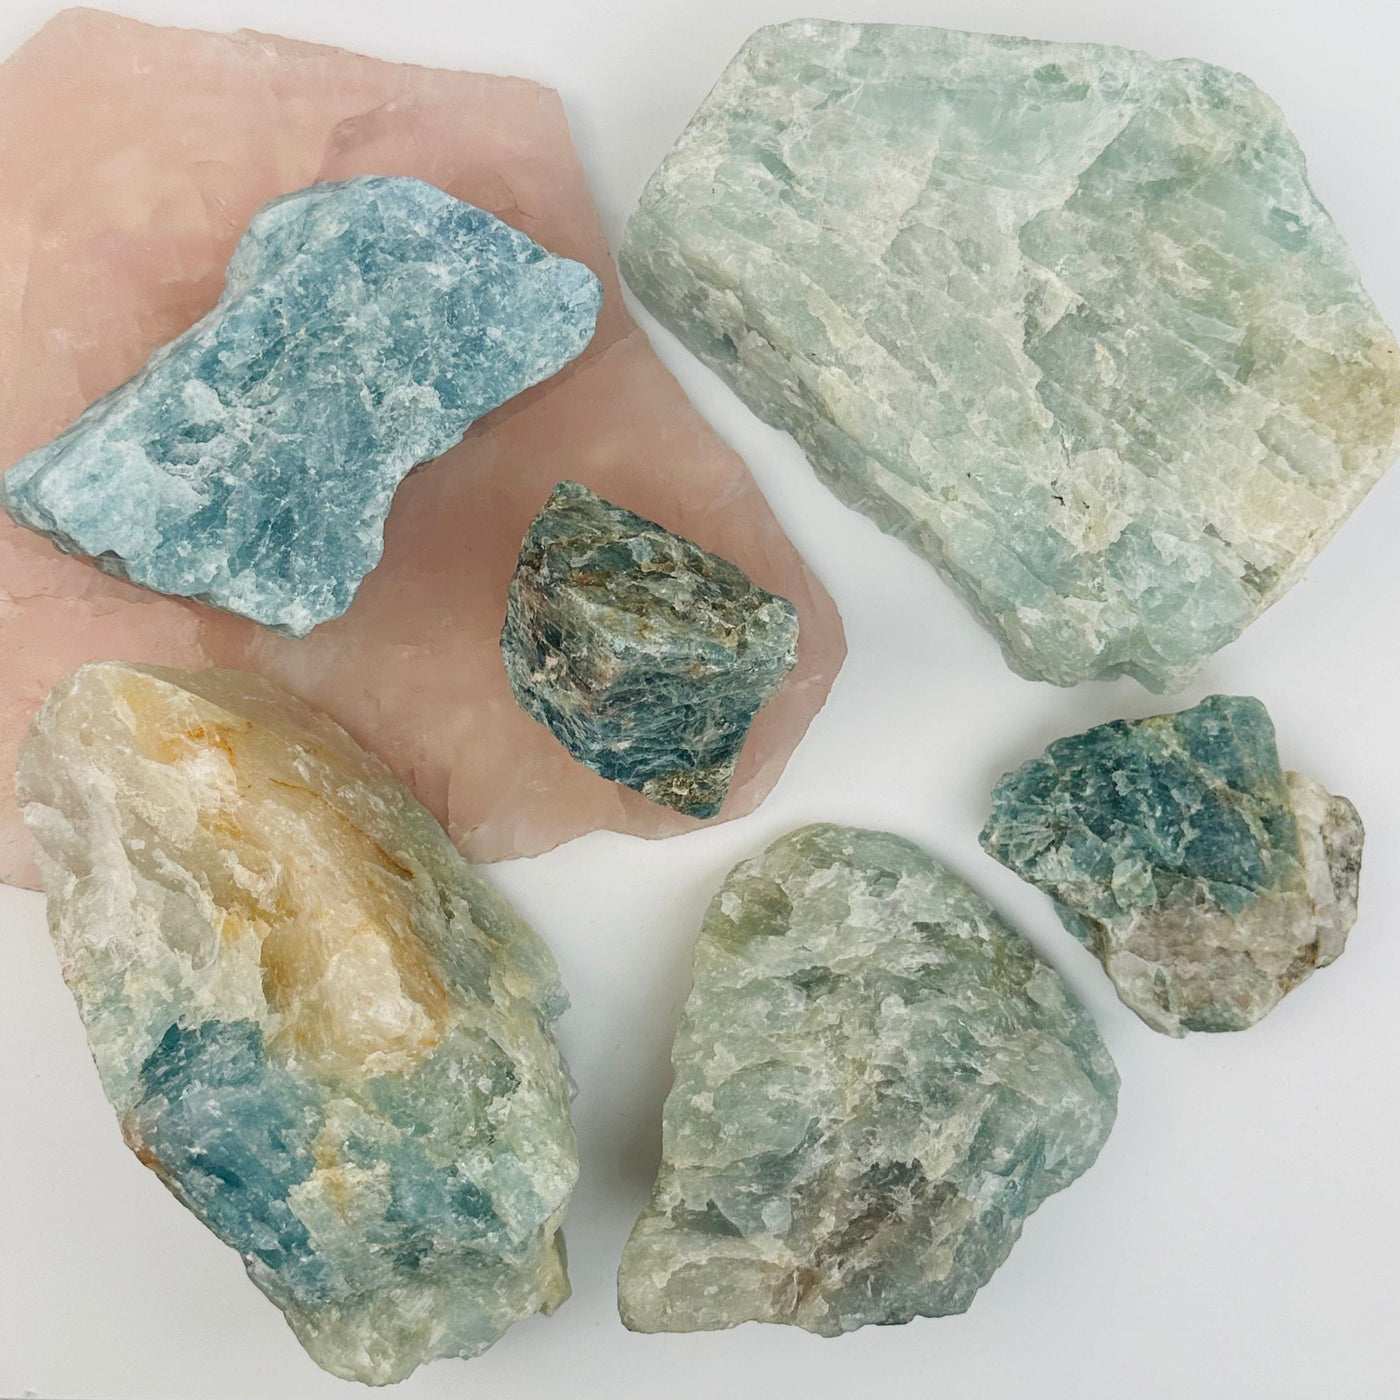 multiple stones displayed to show the differences in the cluster sizes and color shades 